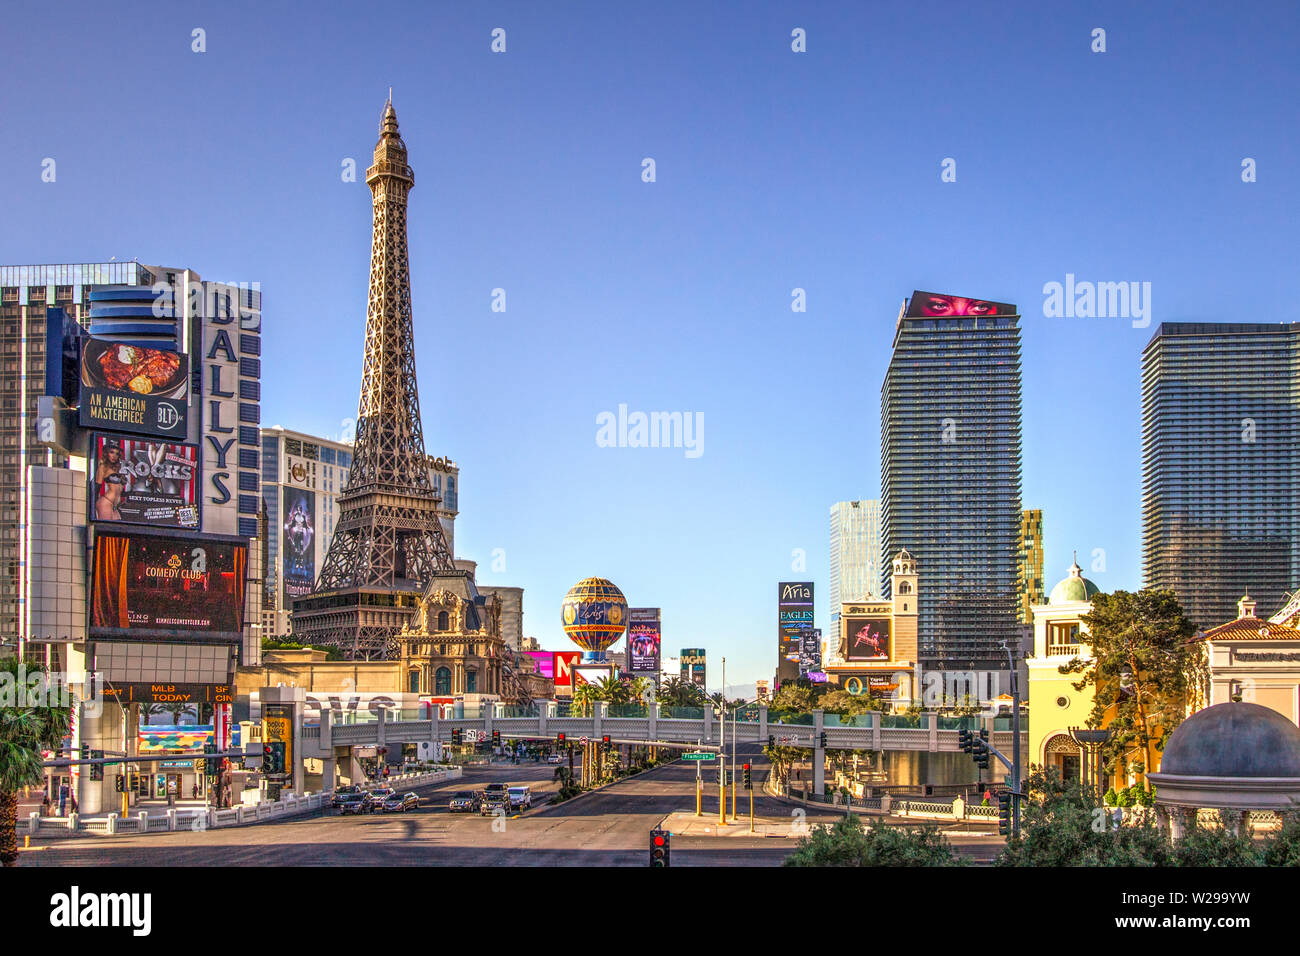 Las Vegas, Nevada, USA - May 6, 2019: View of the famous Las Vegas Strip on a sunny summer day with the Paris resort, Bally's and Aria resort. Stock Photo